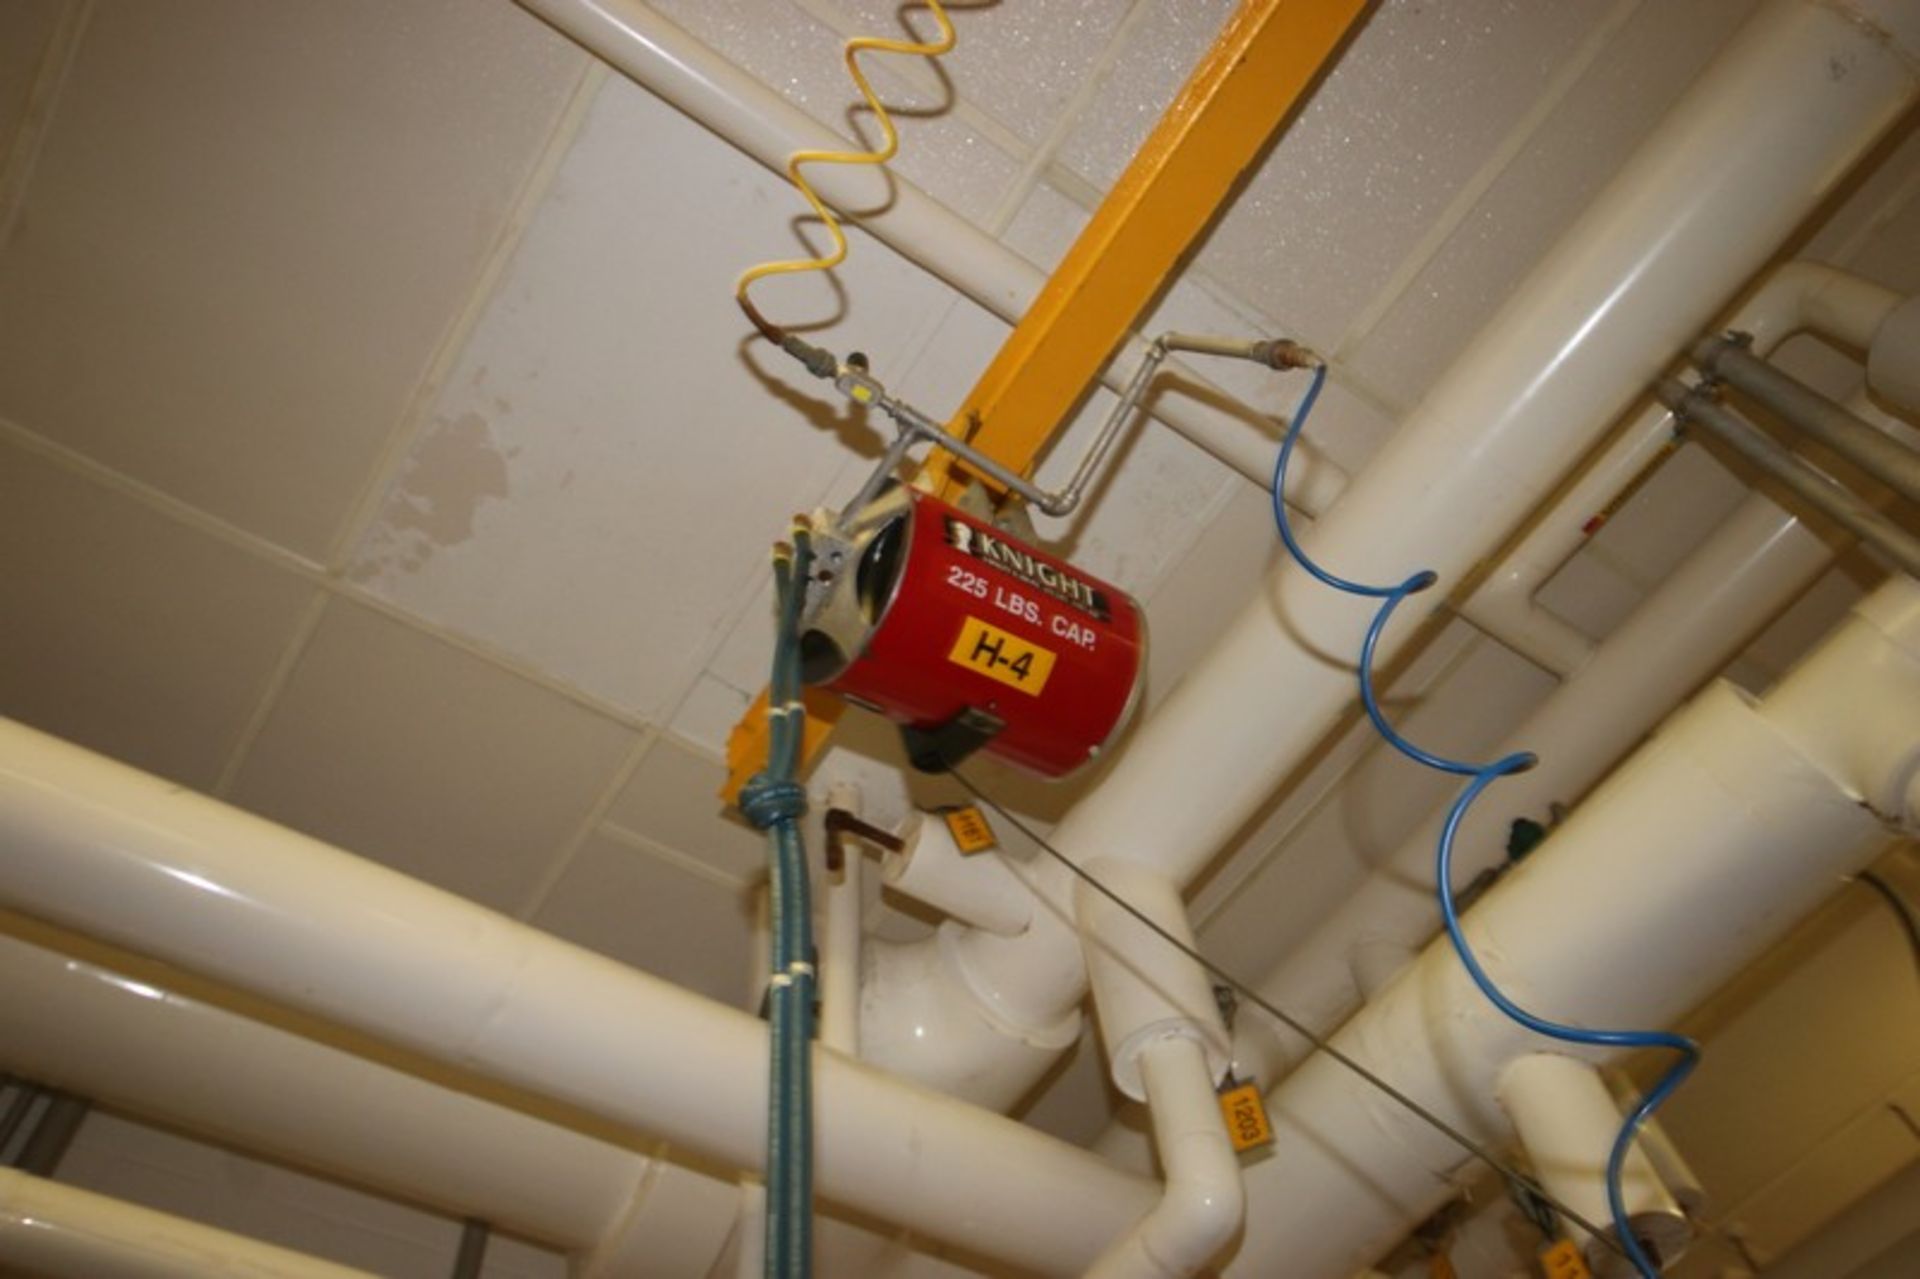 Knight 225 lbs. Capacity Pneumatic Overhead Hoist(NOTE: Does Not Include Cross Beam & Missing Hand